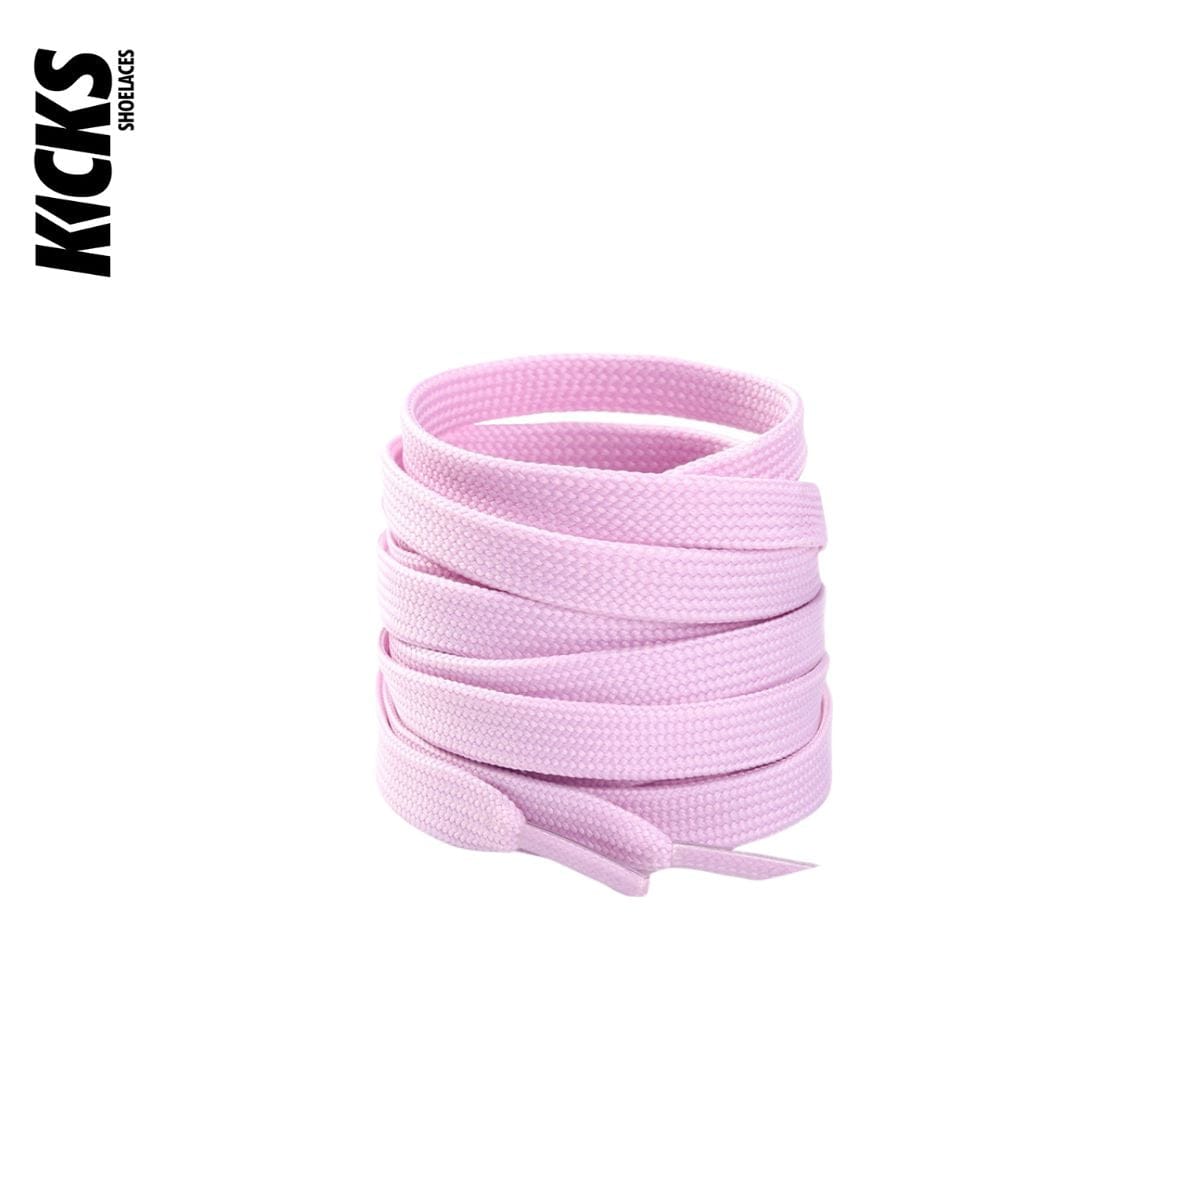 Pastel Purple Replacement Laces for Adidas EQT Sneakers by Kicks Shoelaces